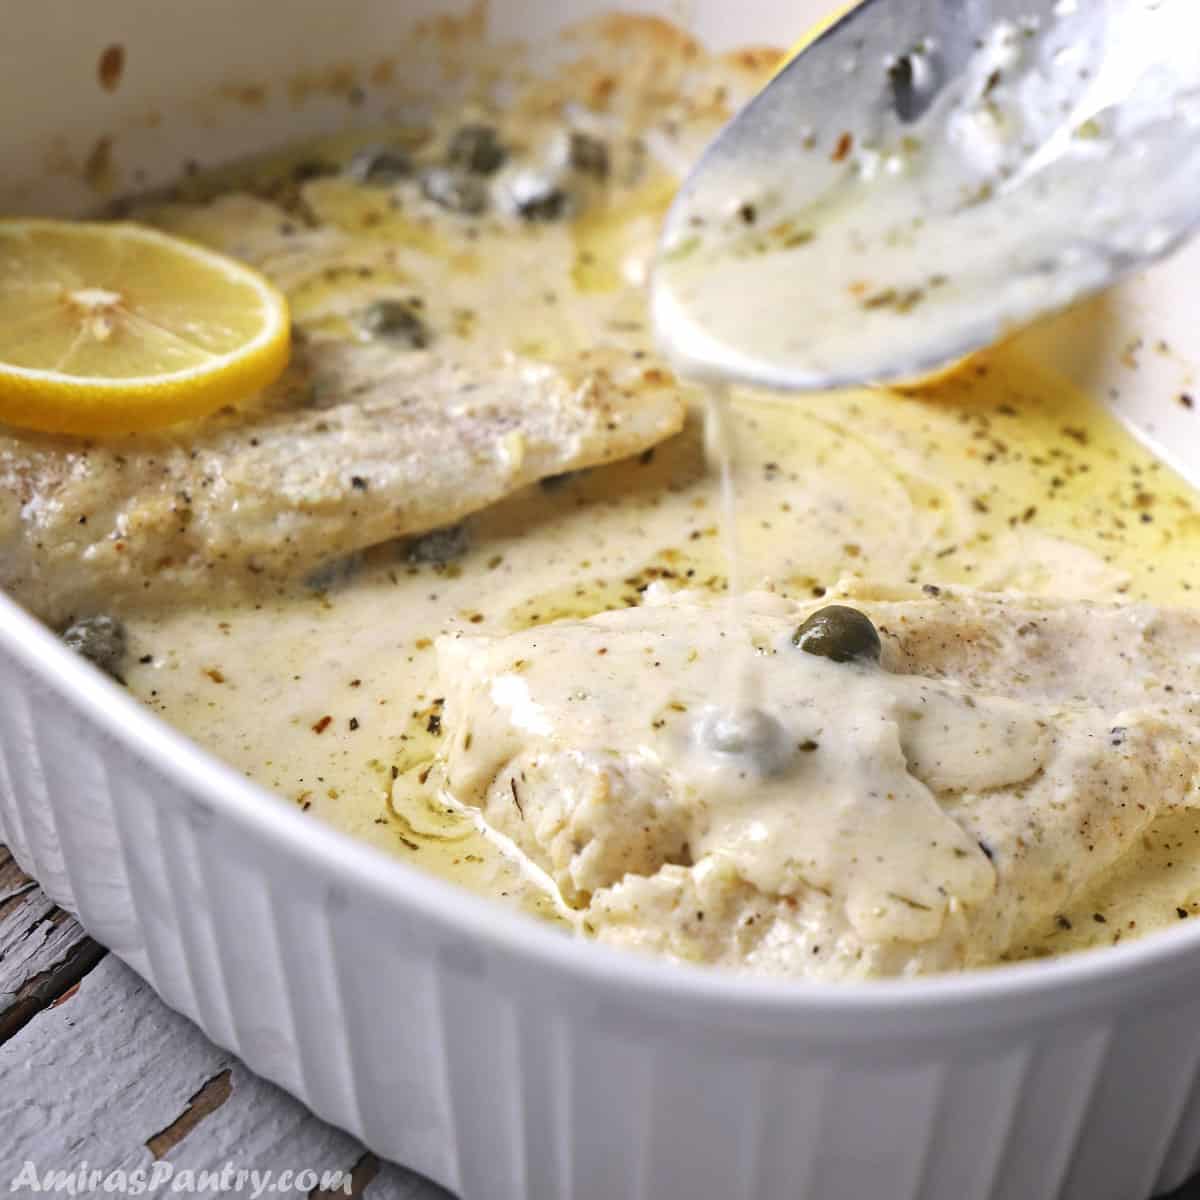 A spoon scooping some creamy sauce over baked fish lemon in a white pan.